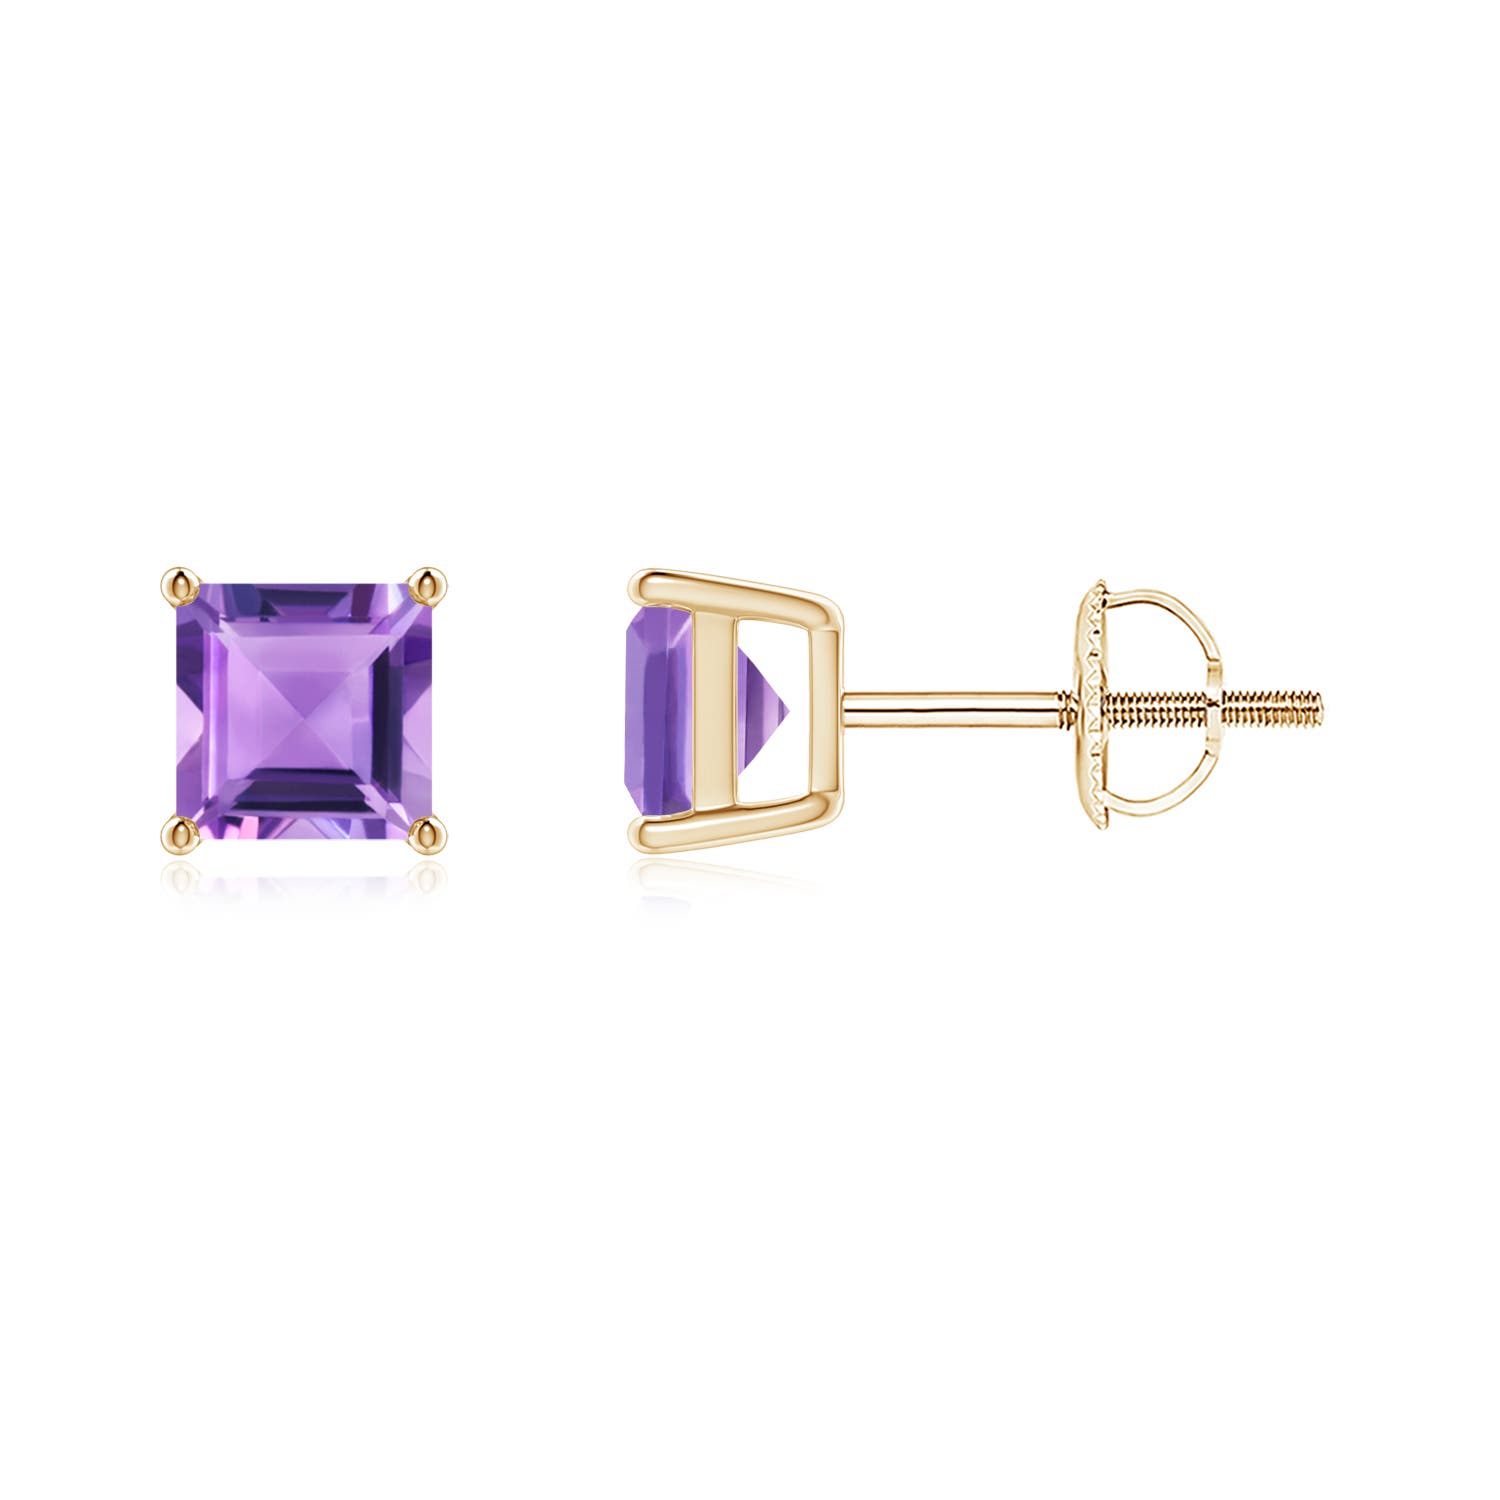 A - Amethyst / 1.4 CT / 14 KT Yellow Gold